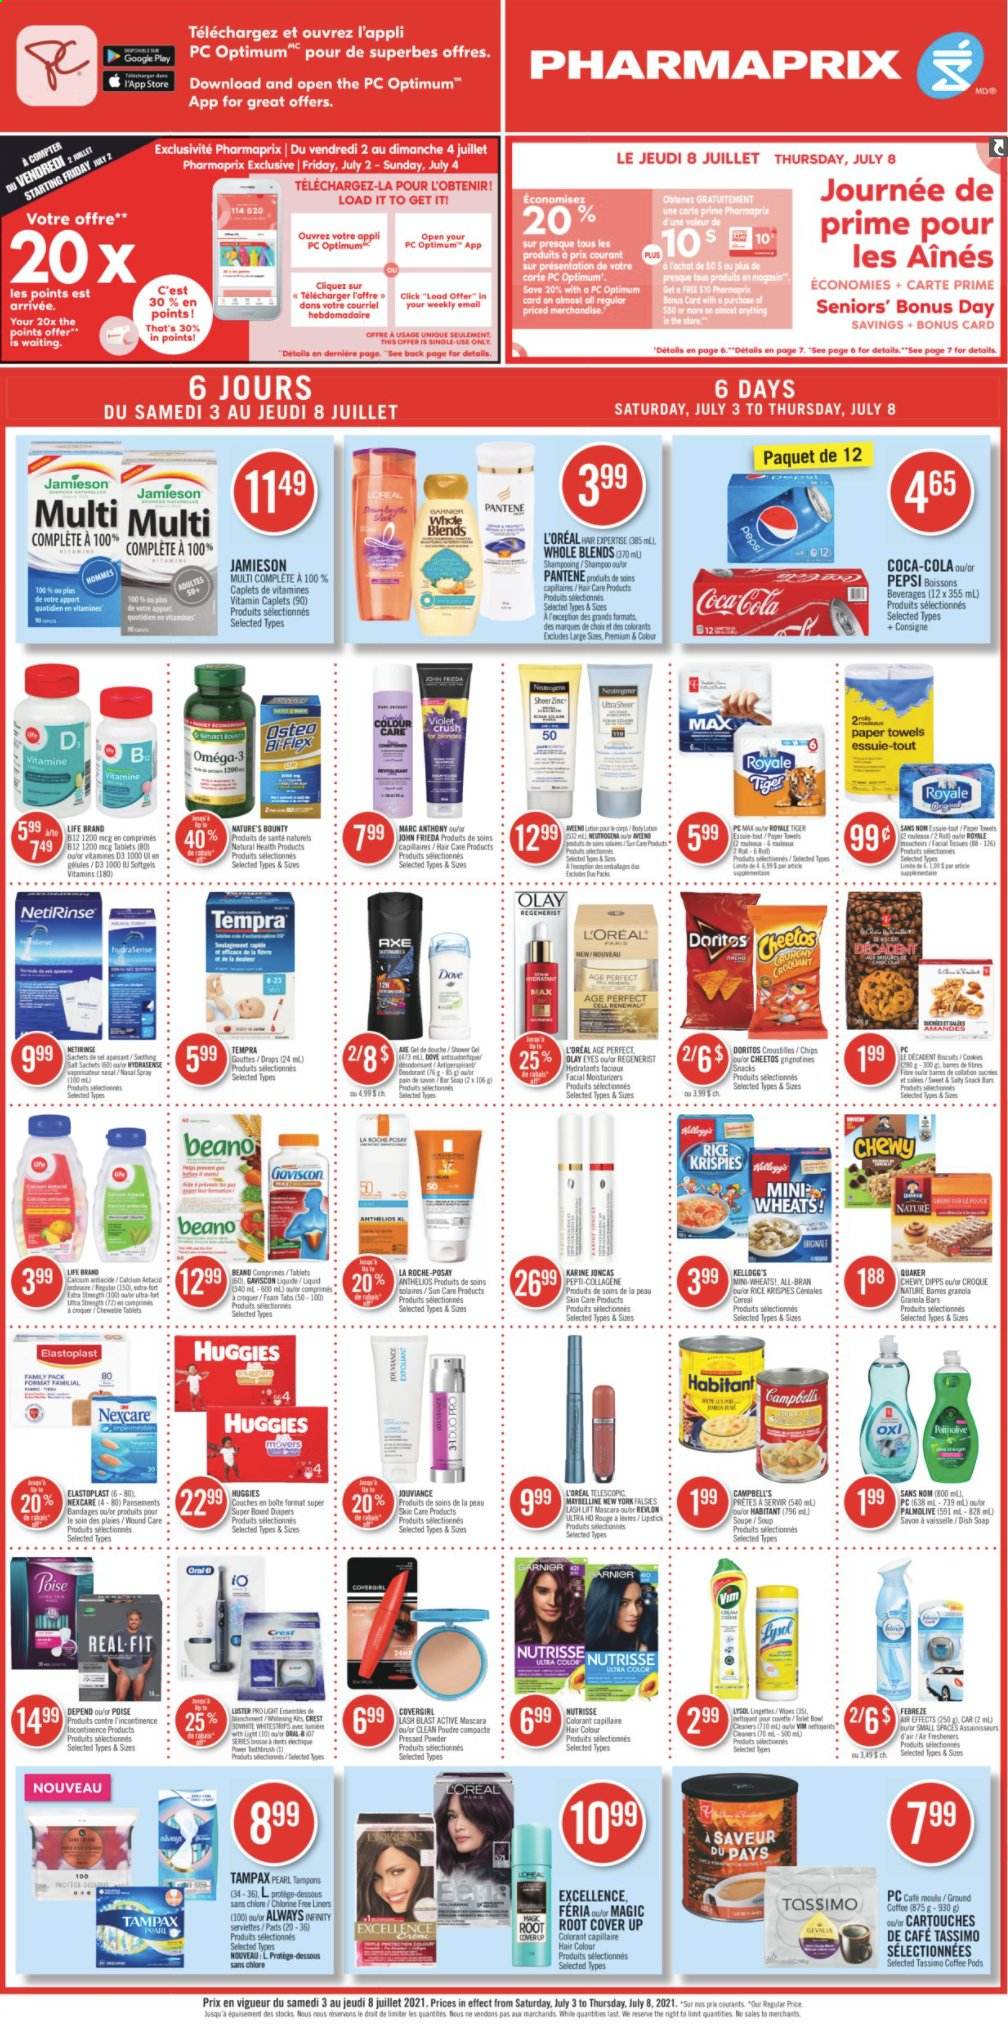 thumbnail - Pharmaprix Flyer - July 03, 2021 - July 08, 2021 - Sales products - Campbell's, soup, Quaker, Doritos, Cheetos, cereals, granola bar, Rice Krispies, All-Bran, Coca-Cola, Pepsi, coffee pods, ground coffee, nappies, kitchen towels, paper towels, Febreze, Lysol, shower gel, Palmolive, soap, Crest, tampons, L’Oréal, La Roche-Posay, moisturizer, Olay, Revlon, hair color, John Frieda, lipstick, face powder, UHD TV, ultra hd, Nature's Bounty, Omega-3, Gaviscon, vitamin D3, nasal spray, Garnier, mascara, Maybelline, Tampax, Huggies, Pantene, chips. Page 1.